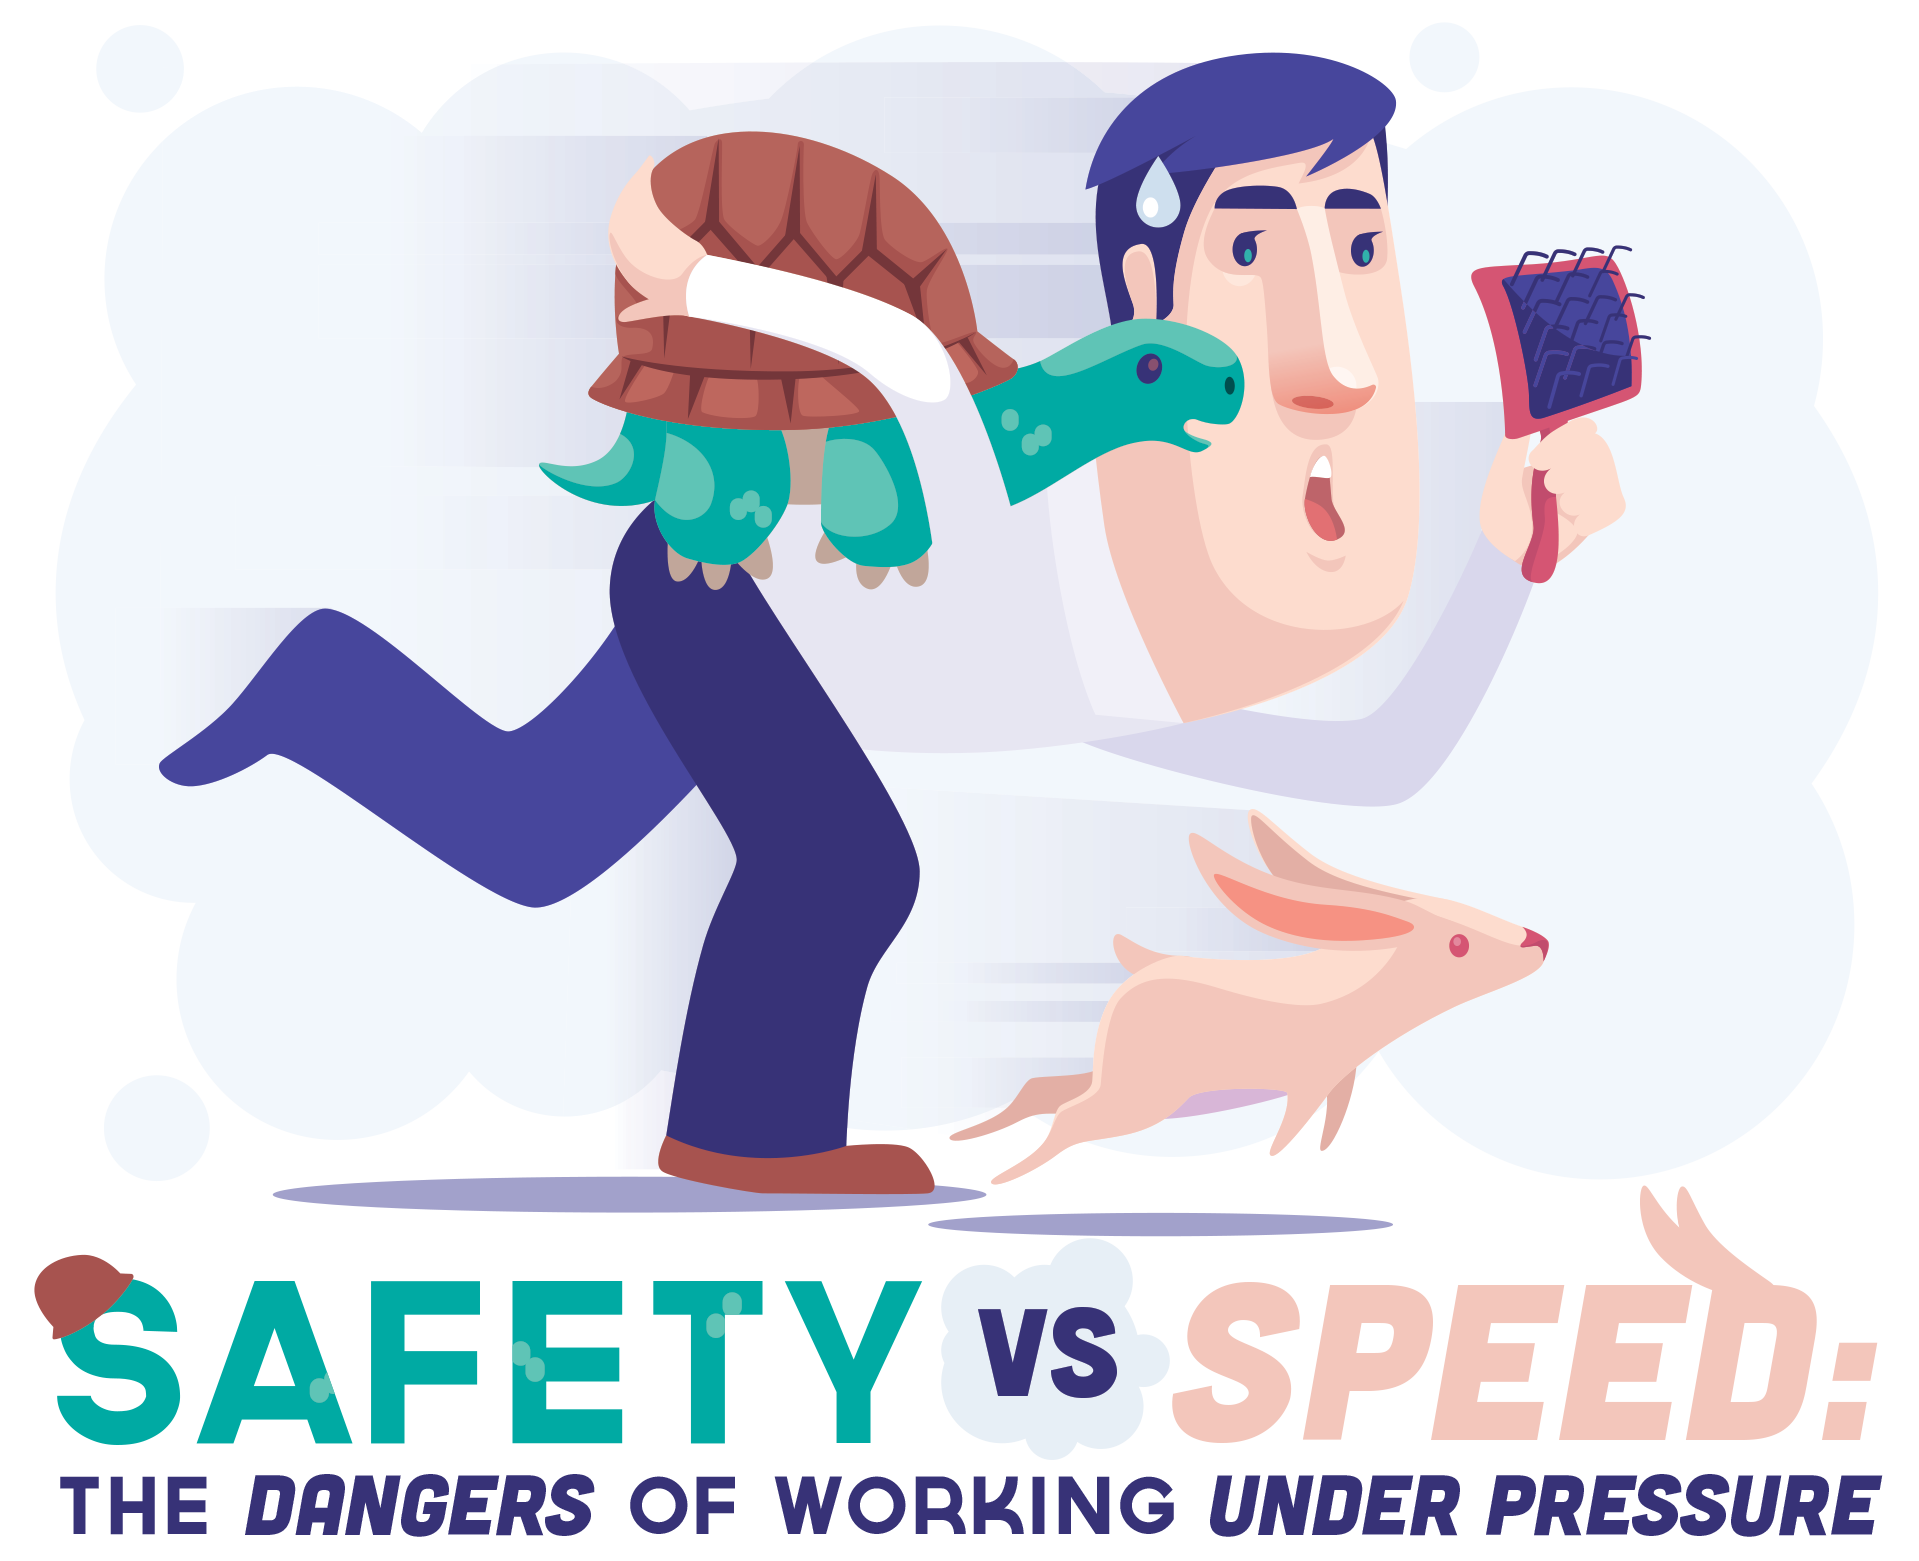 Safety vs Speed: The Dangers of Working Under Pressure, title, with an illustration of a man running and holding a brush with a turtle on his back and a rabbit running in front of him.